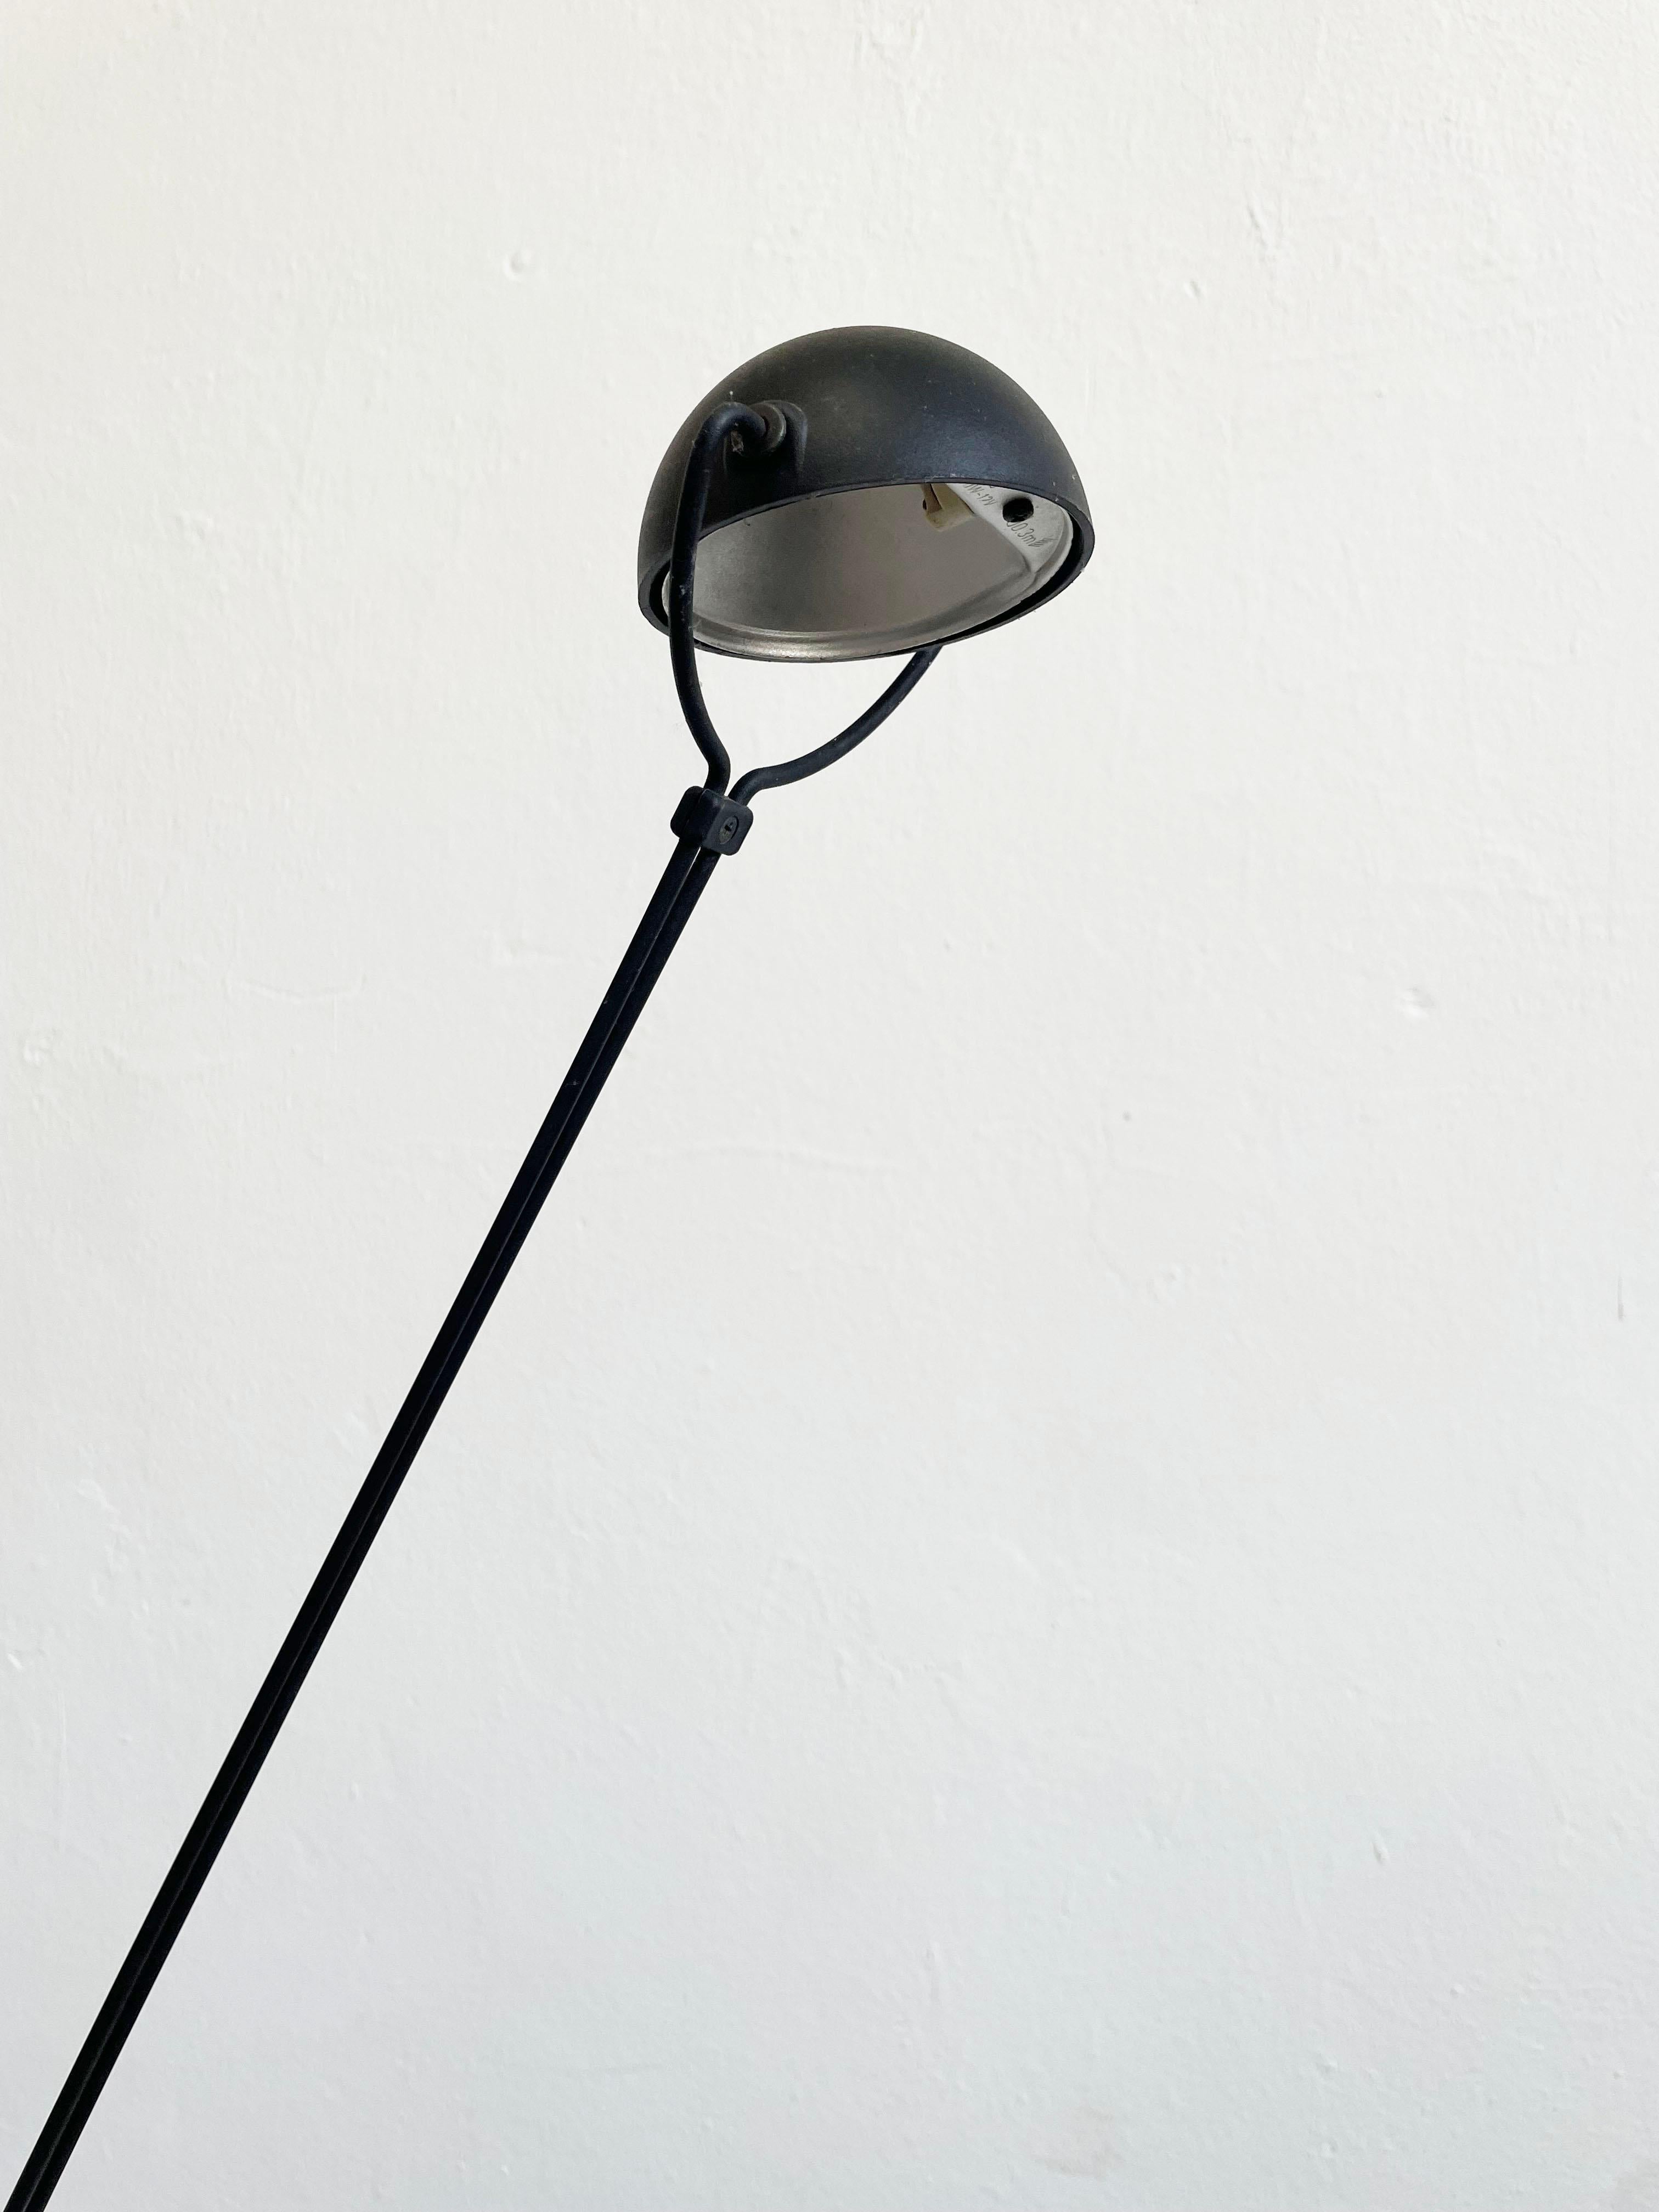 Powder-Coated Vintage YUKI Floor Lamp by Paolo Piva for Stefano Cevoli, Italy 1980's For Sale